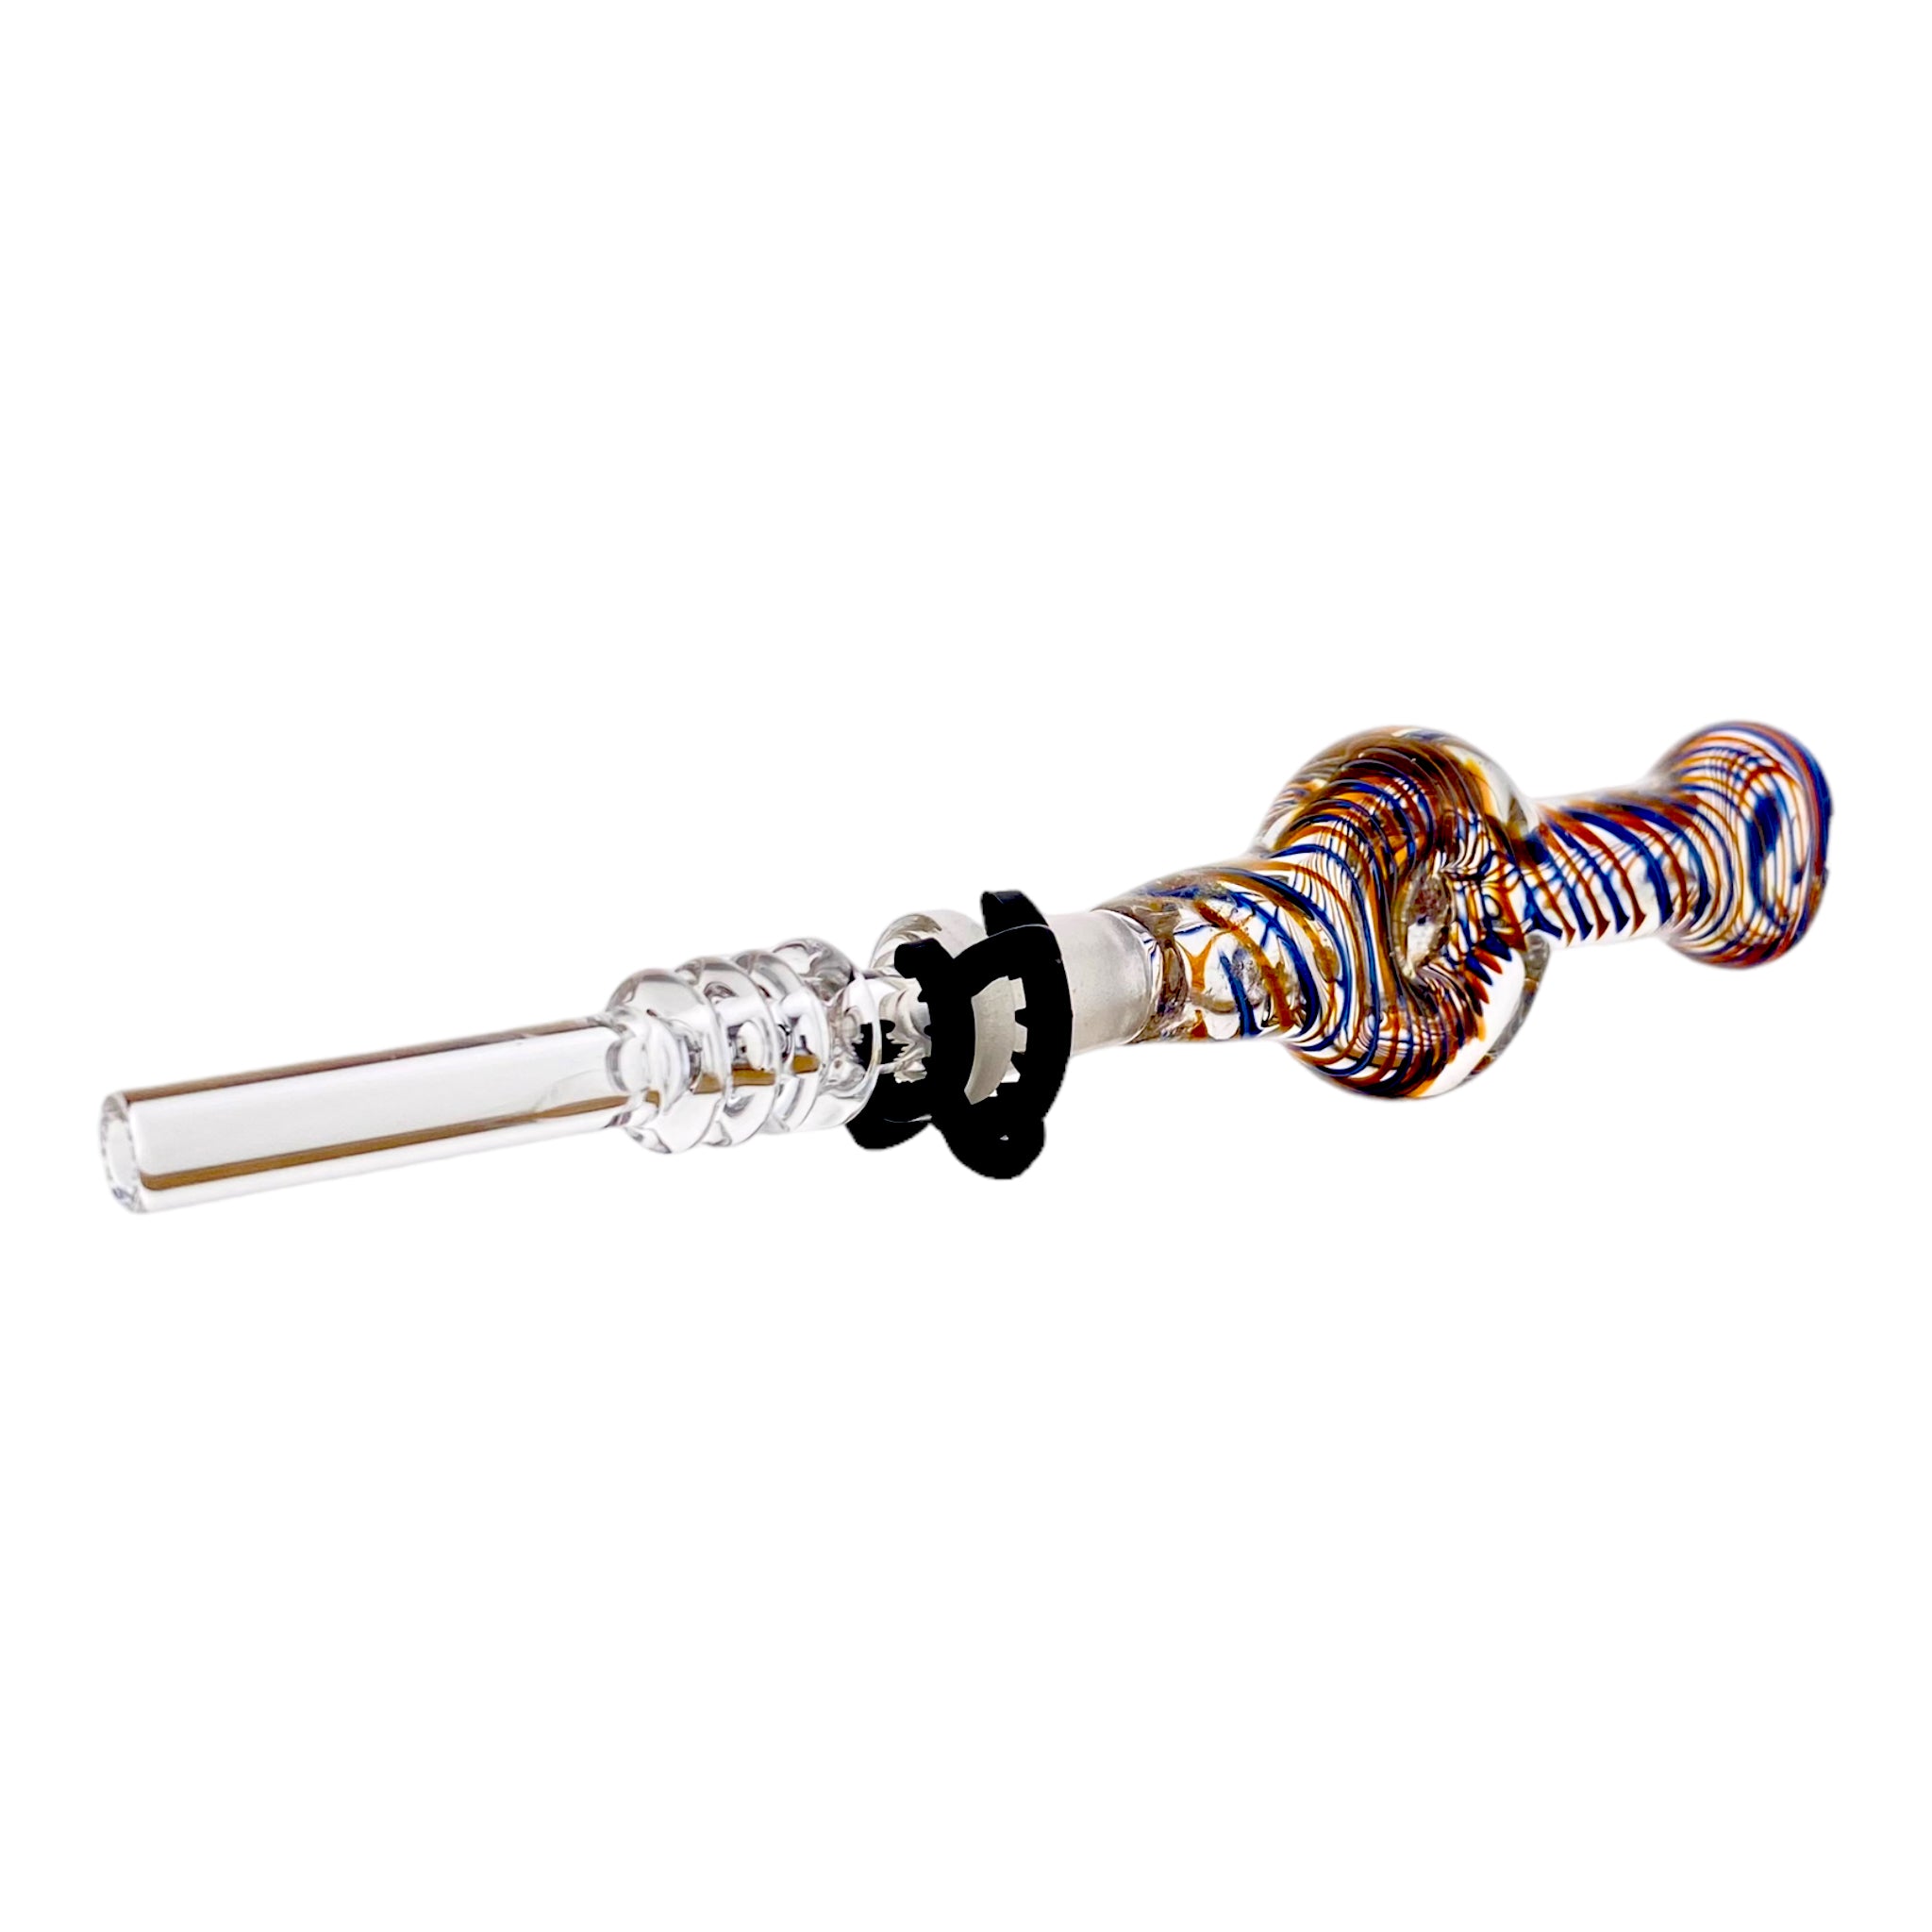 10mm Nectar Collector - Blue And Orange Inside Out Spiral Donut With 10mm Quartz Tip